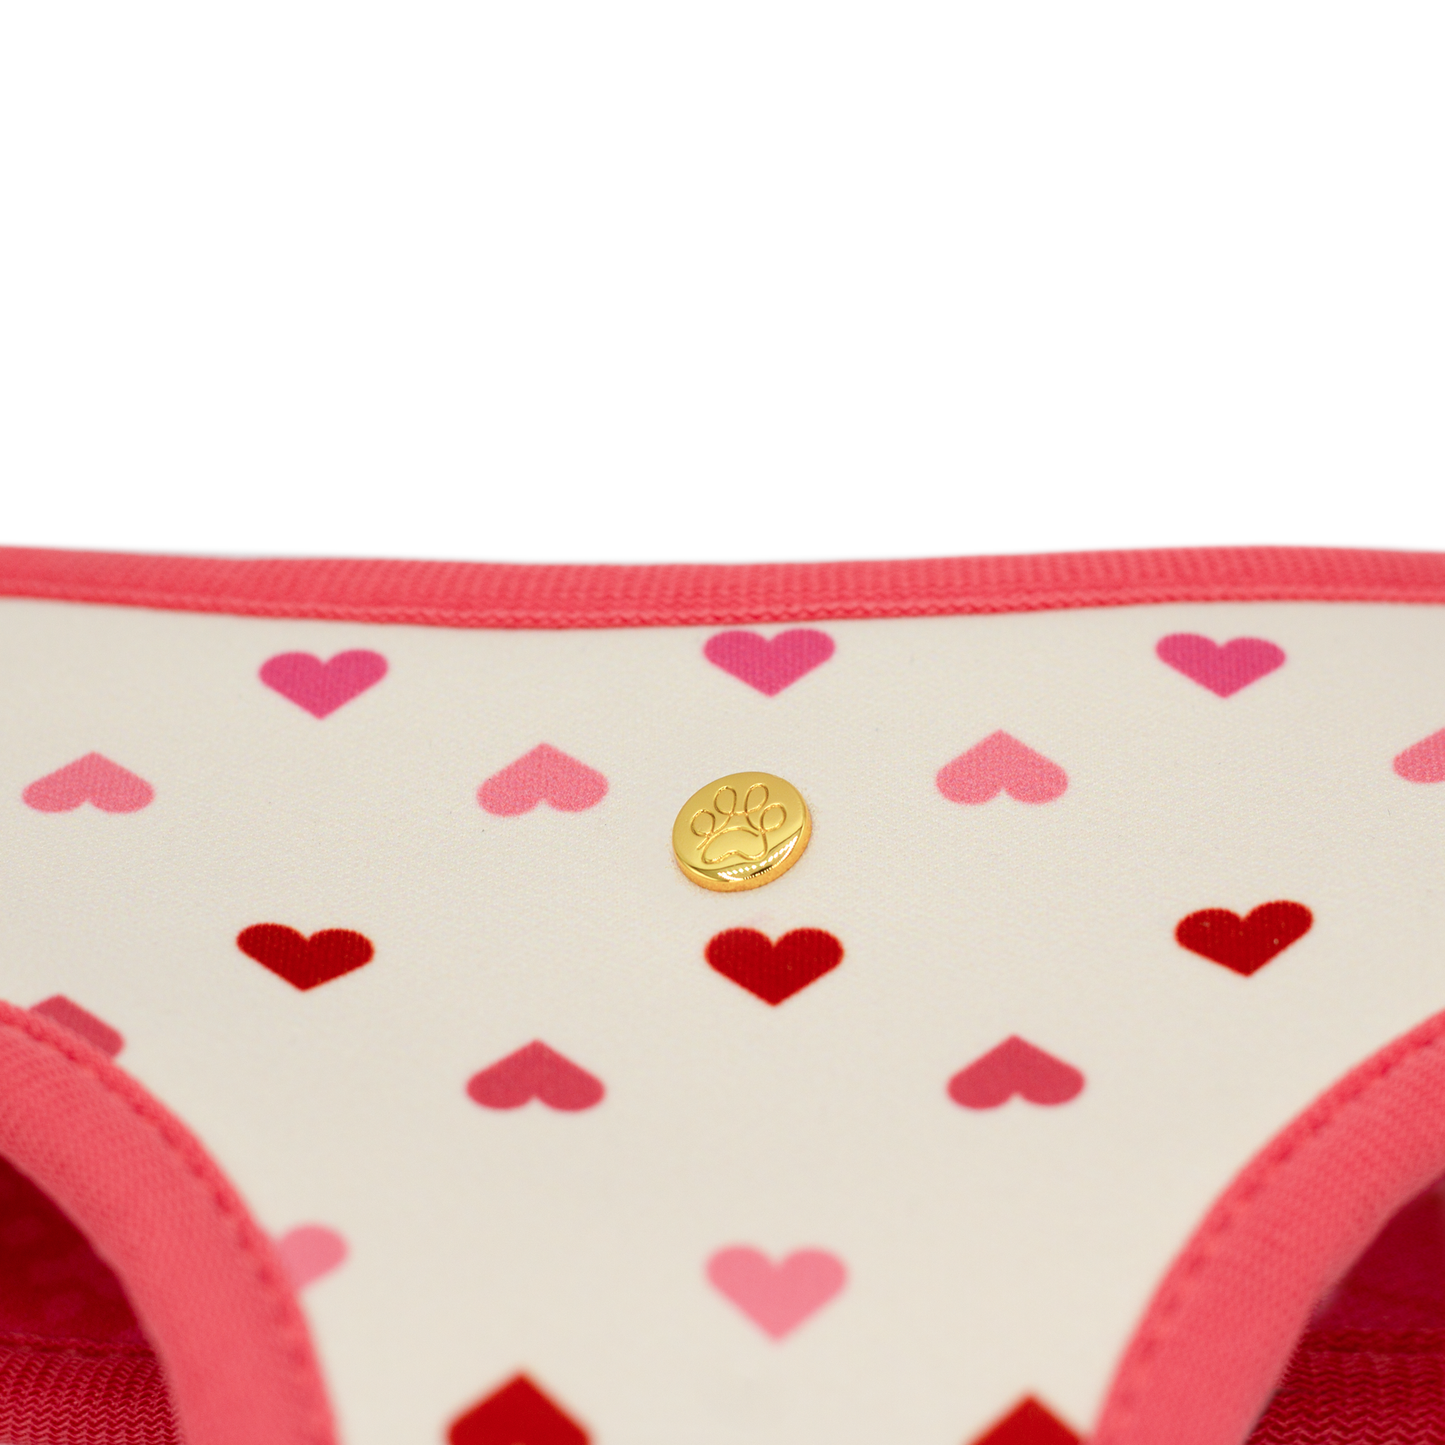 Pata Paw blush hearts reversible harness showing a close-up of its golden paw.